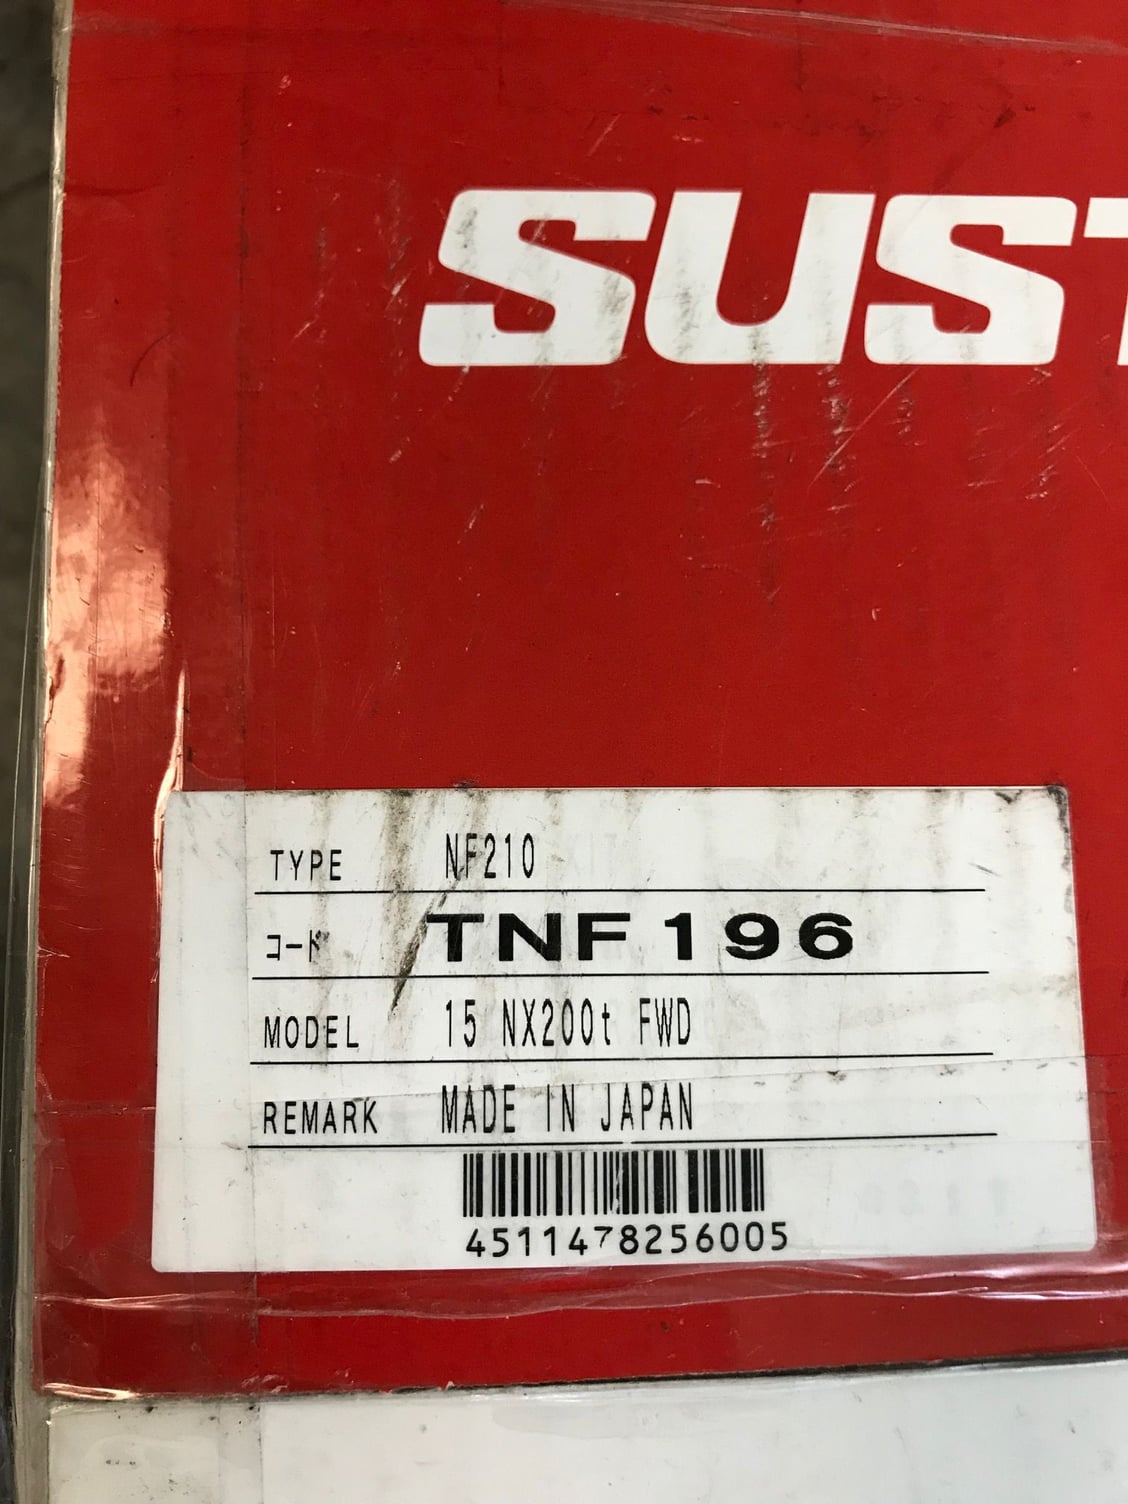 Steering/Suspension - NX200t Tanabe springs - Used - 2016 to 2017 Lexus NX200t - Miami, FL 33186, United States